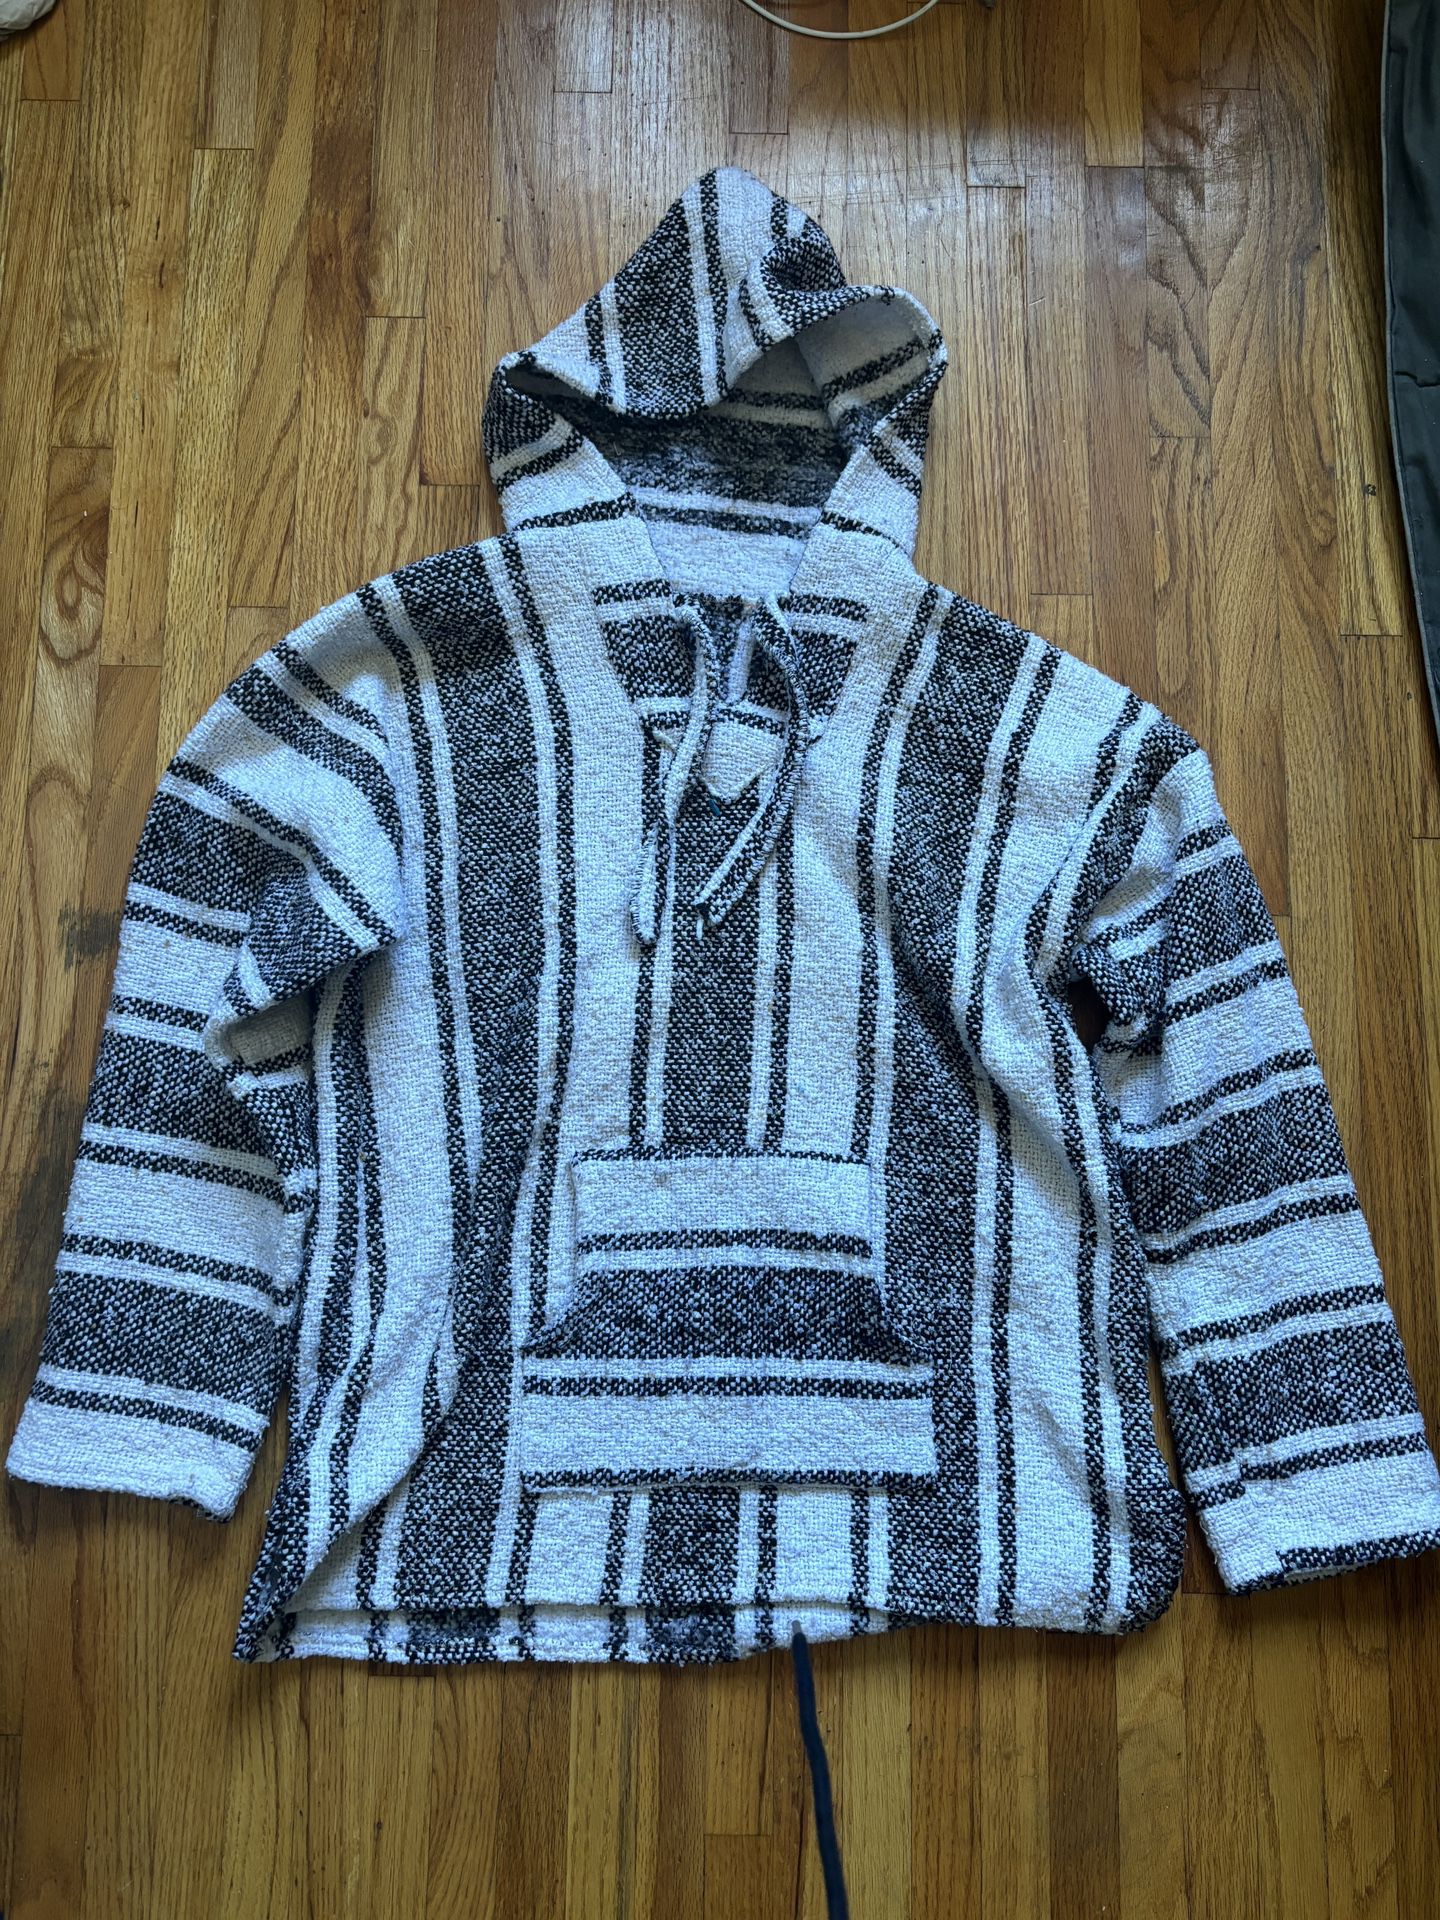 S Black & White Poncho from Mexico